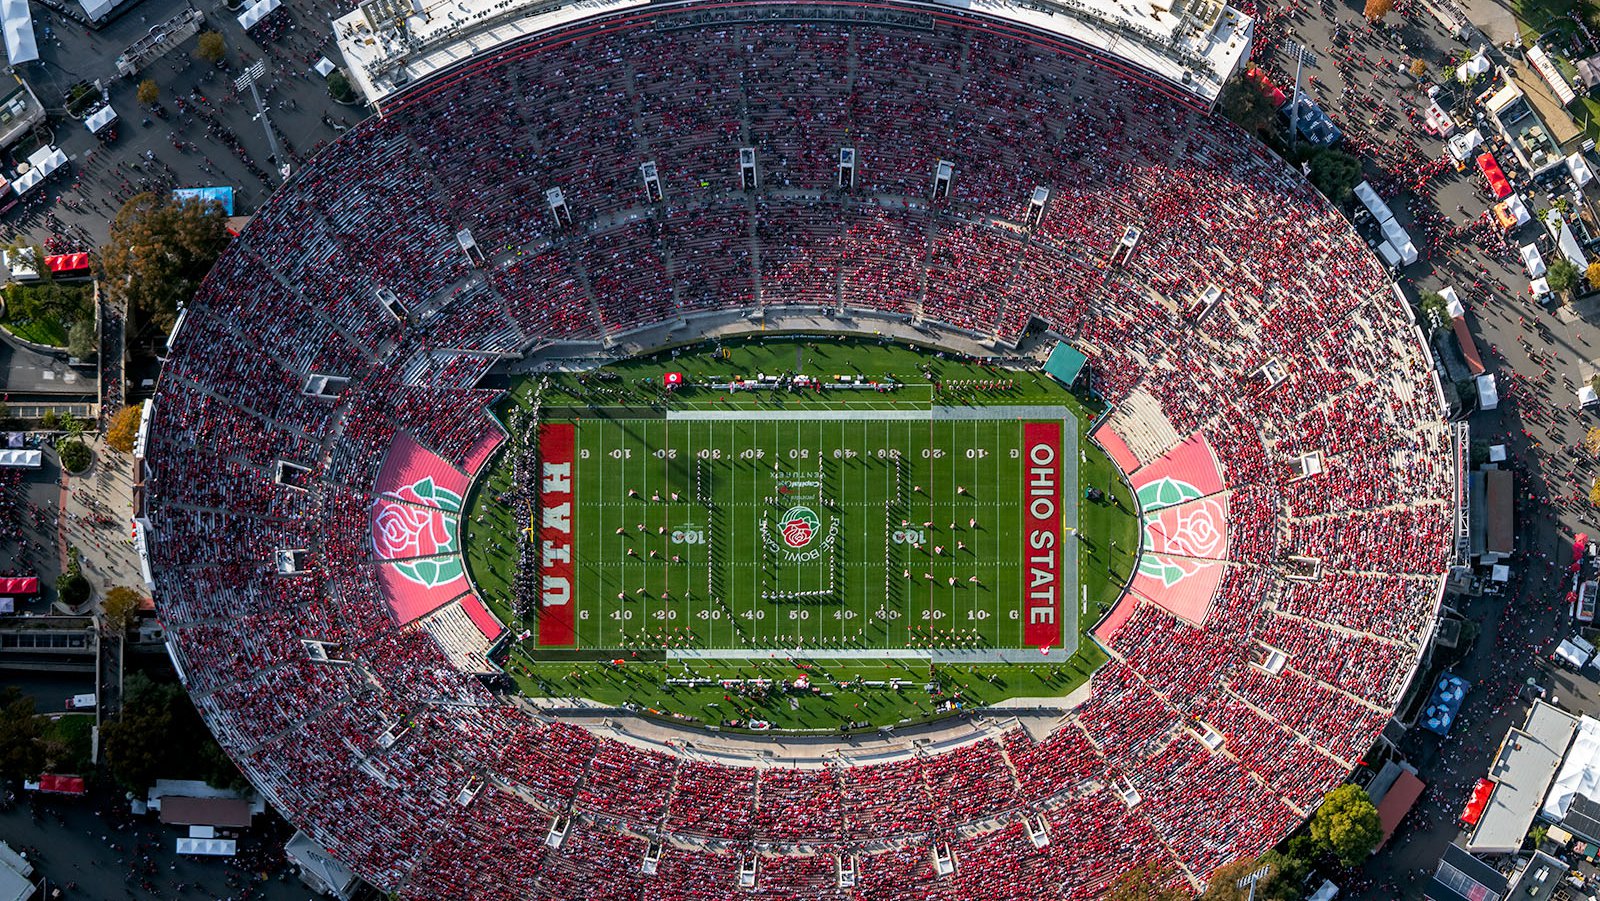 Blog image of the University of Utah marching band "The Pride of Utah" forming a U on the field of the 108th Rose Bowl Game